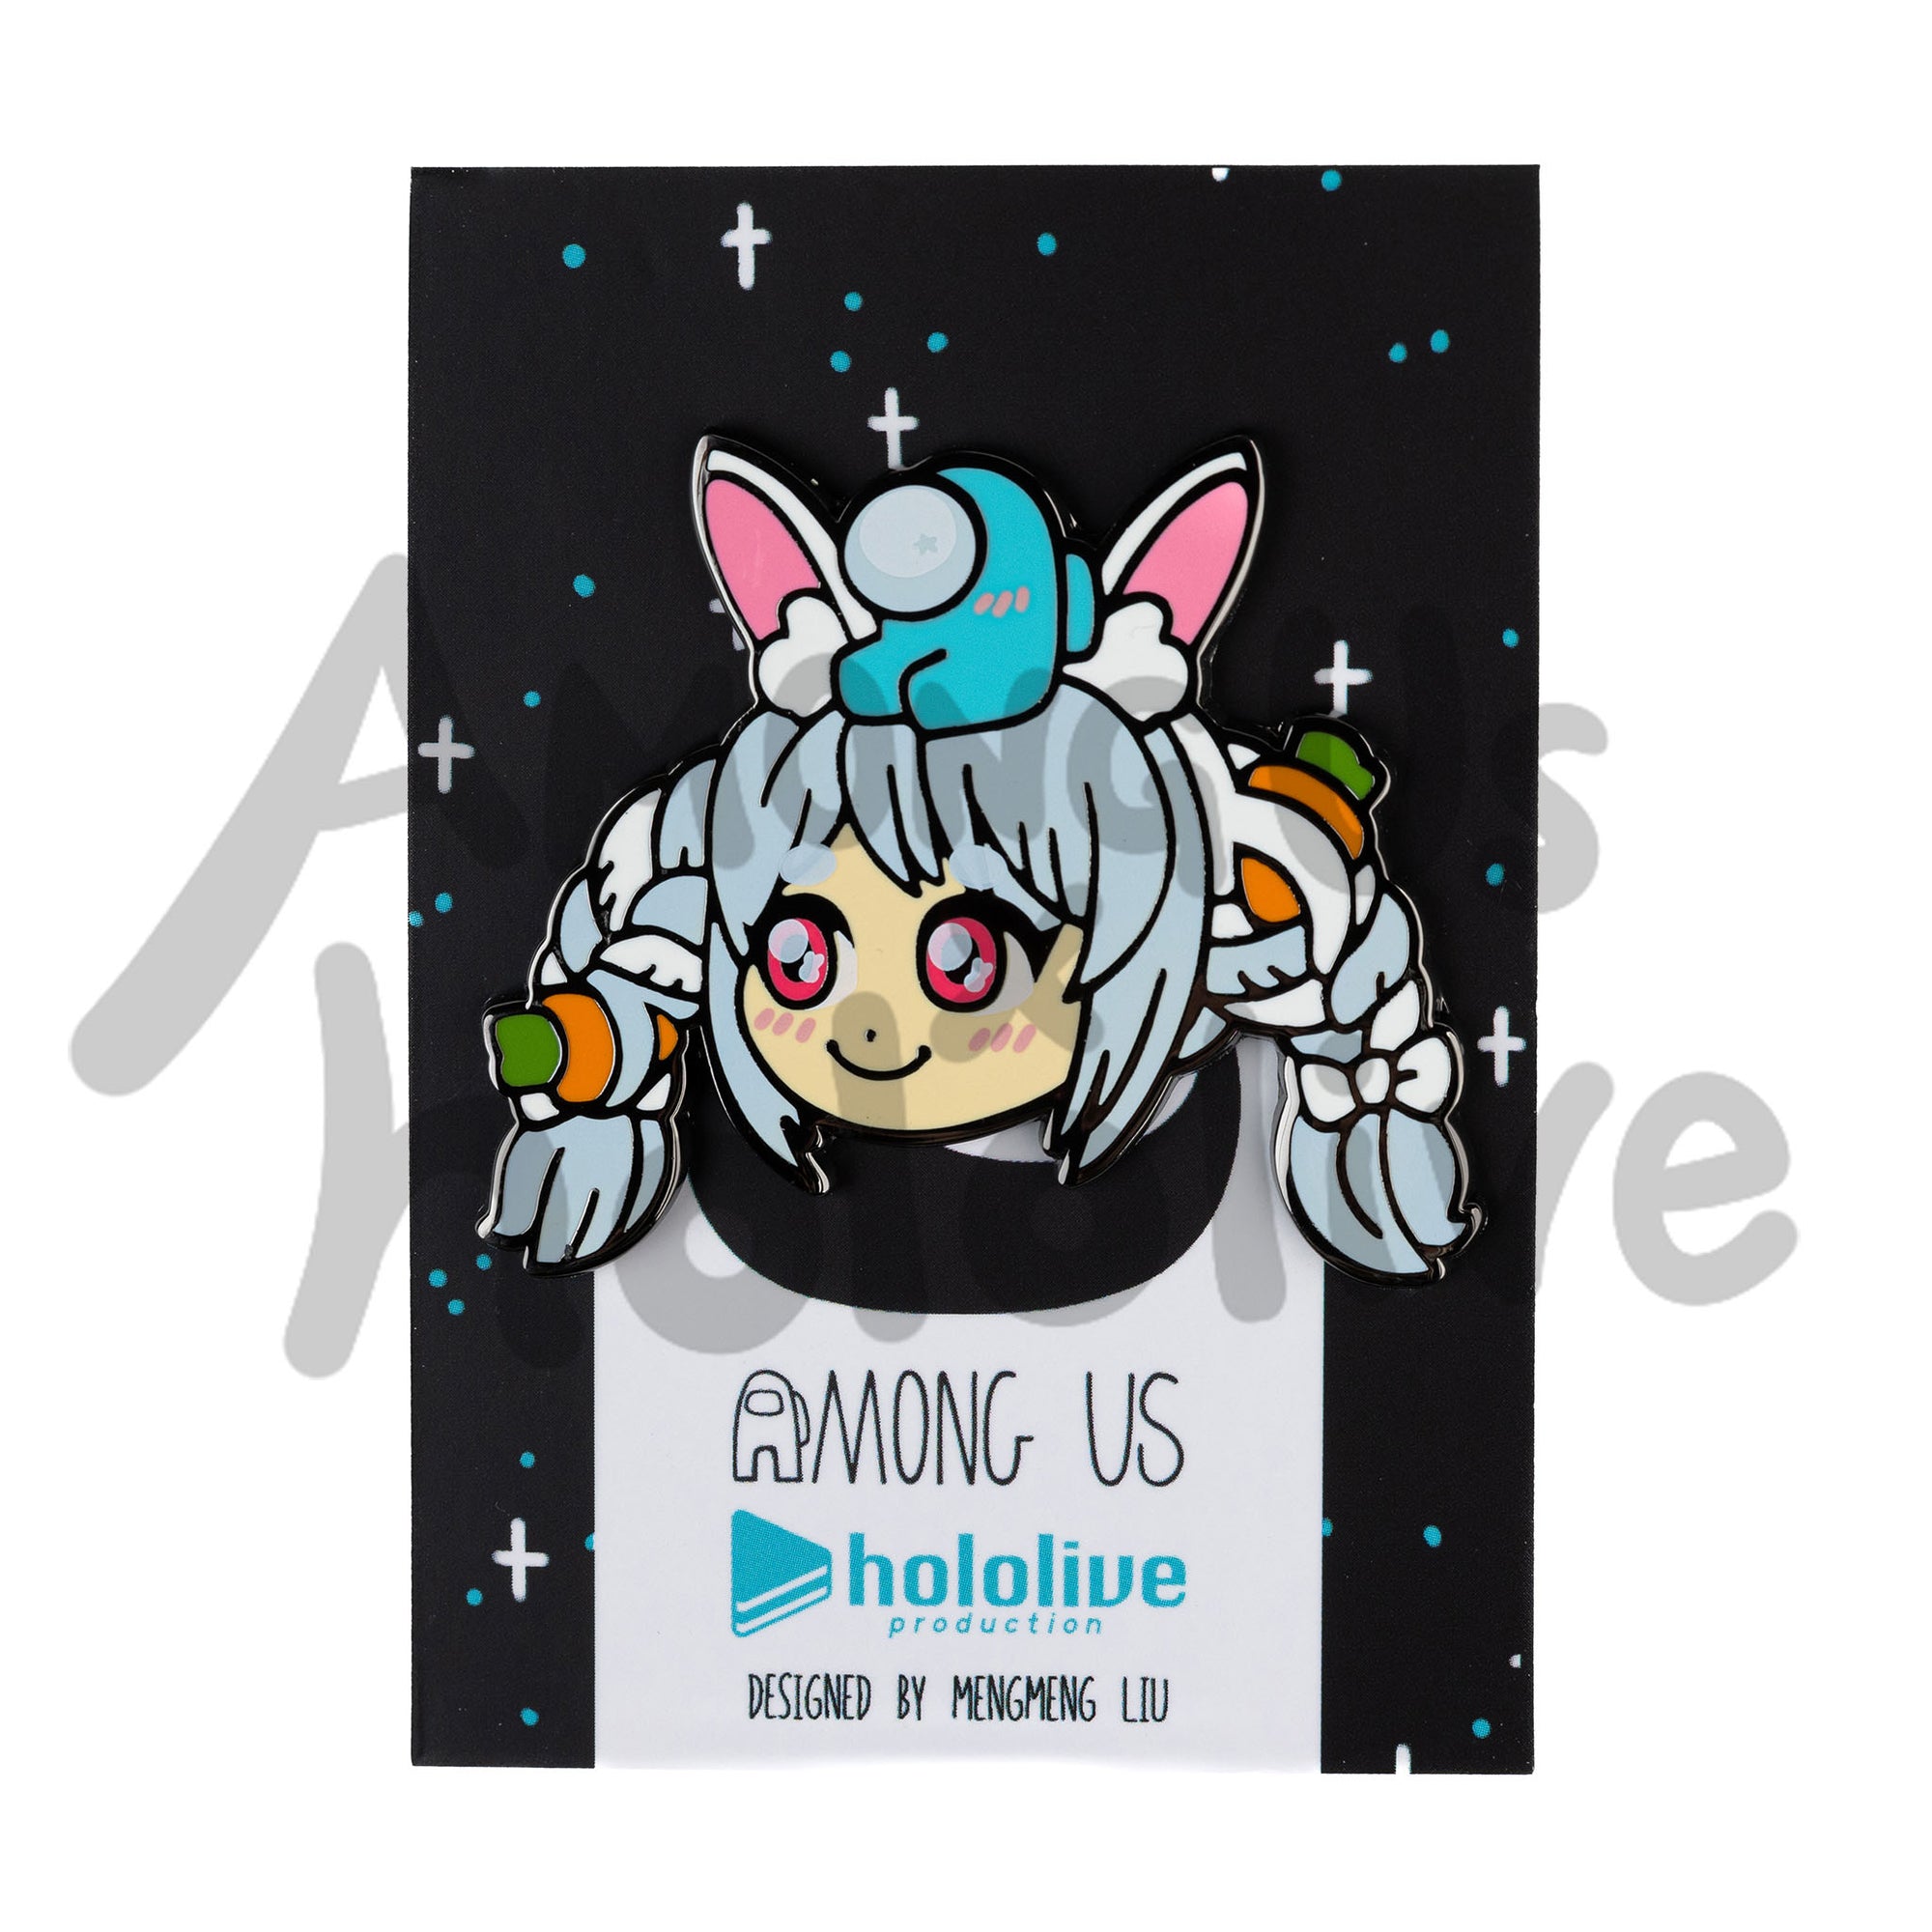 Enamel Pin of Usada Pekora's Face from Hololive. Pekora has fair skin, teal sparkly eyes, and light blue braided hair into large pigtails with two carrots woven throughout. She wears a white rabbit ears headband.  There's a Cyan sitting atop her head. Both characters have pink blush marks on their faces.